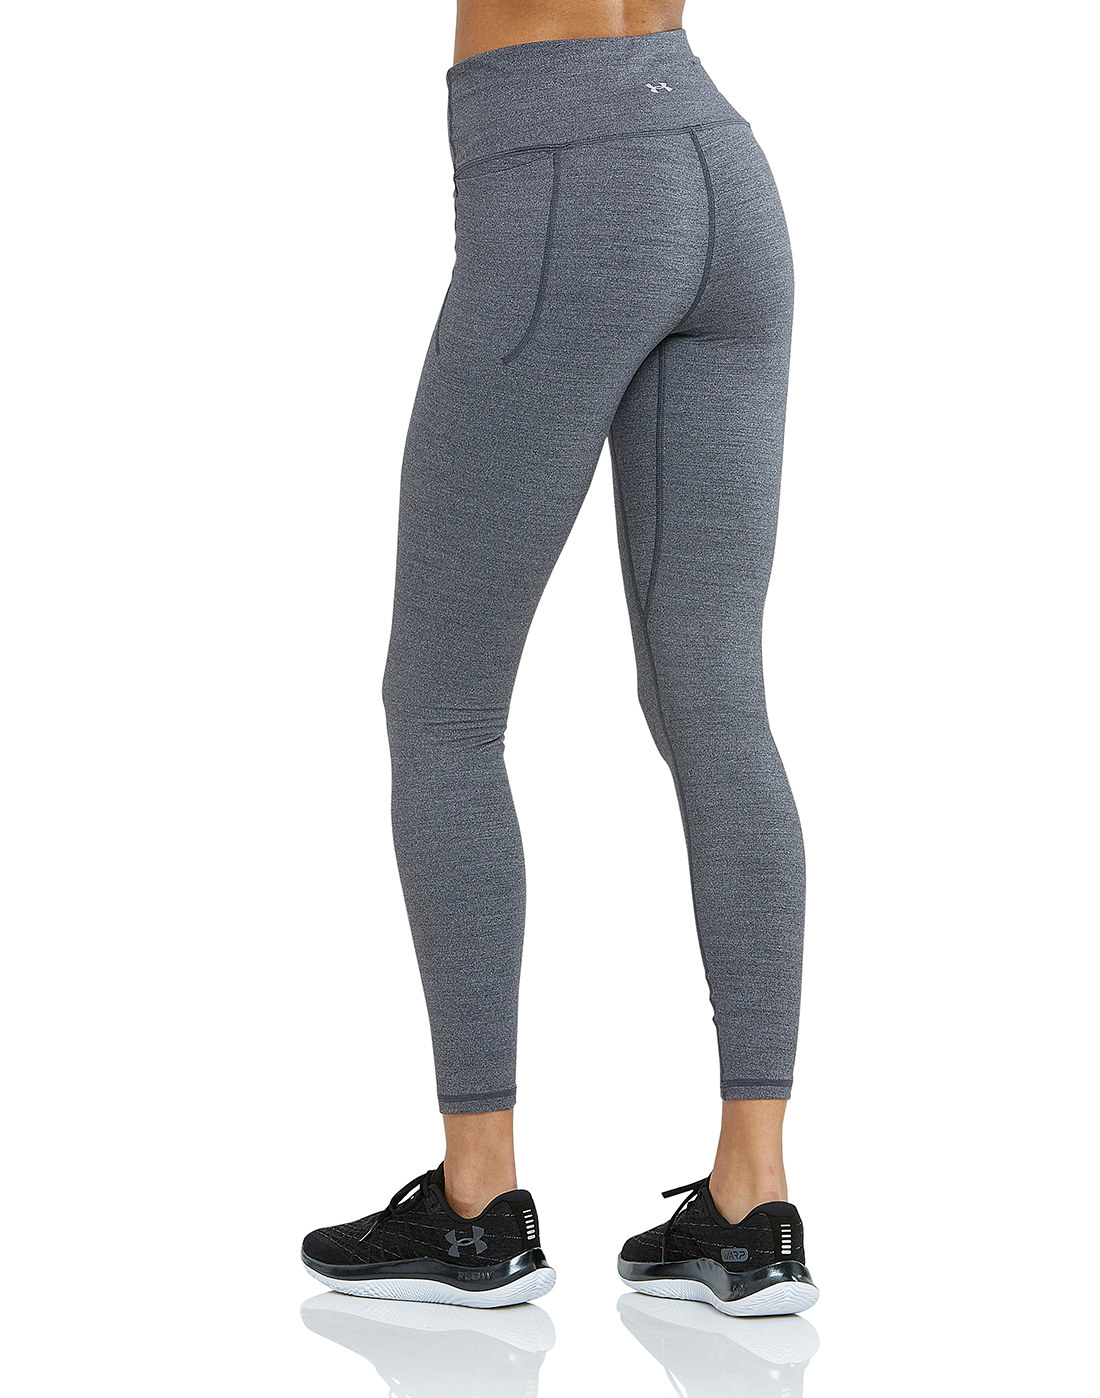 Under Armour Womens Meridian Leggings - Black | Life Style Sports IE